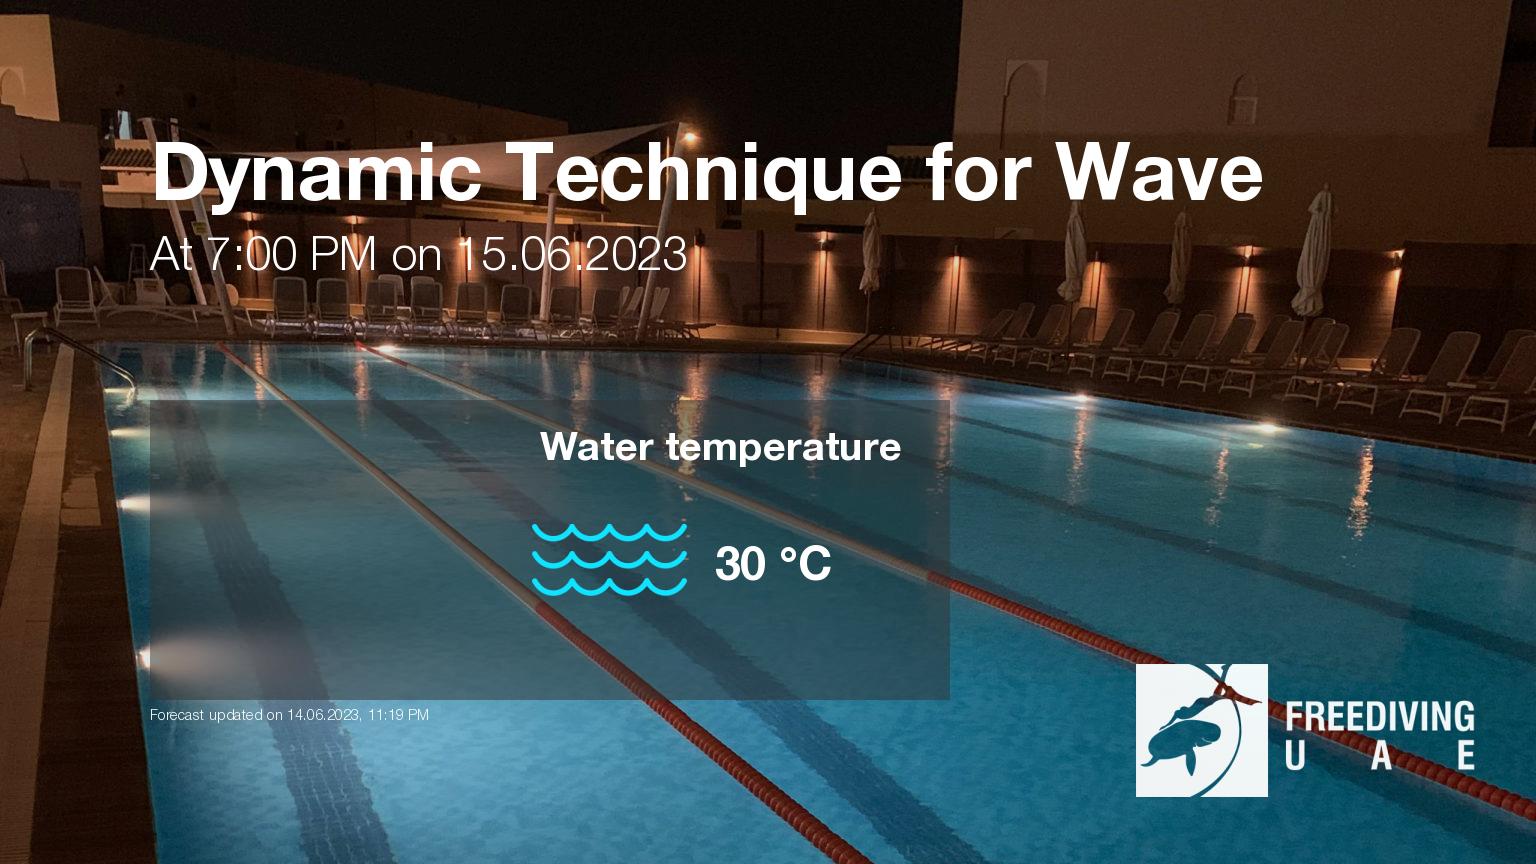 Expected weather during Dynamic Technique for Wave on Thu, Jun 15, at 7:00 PM